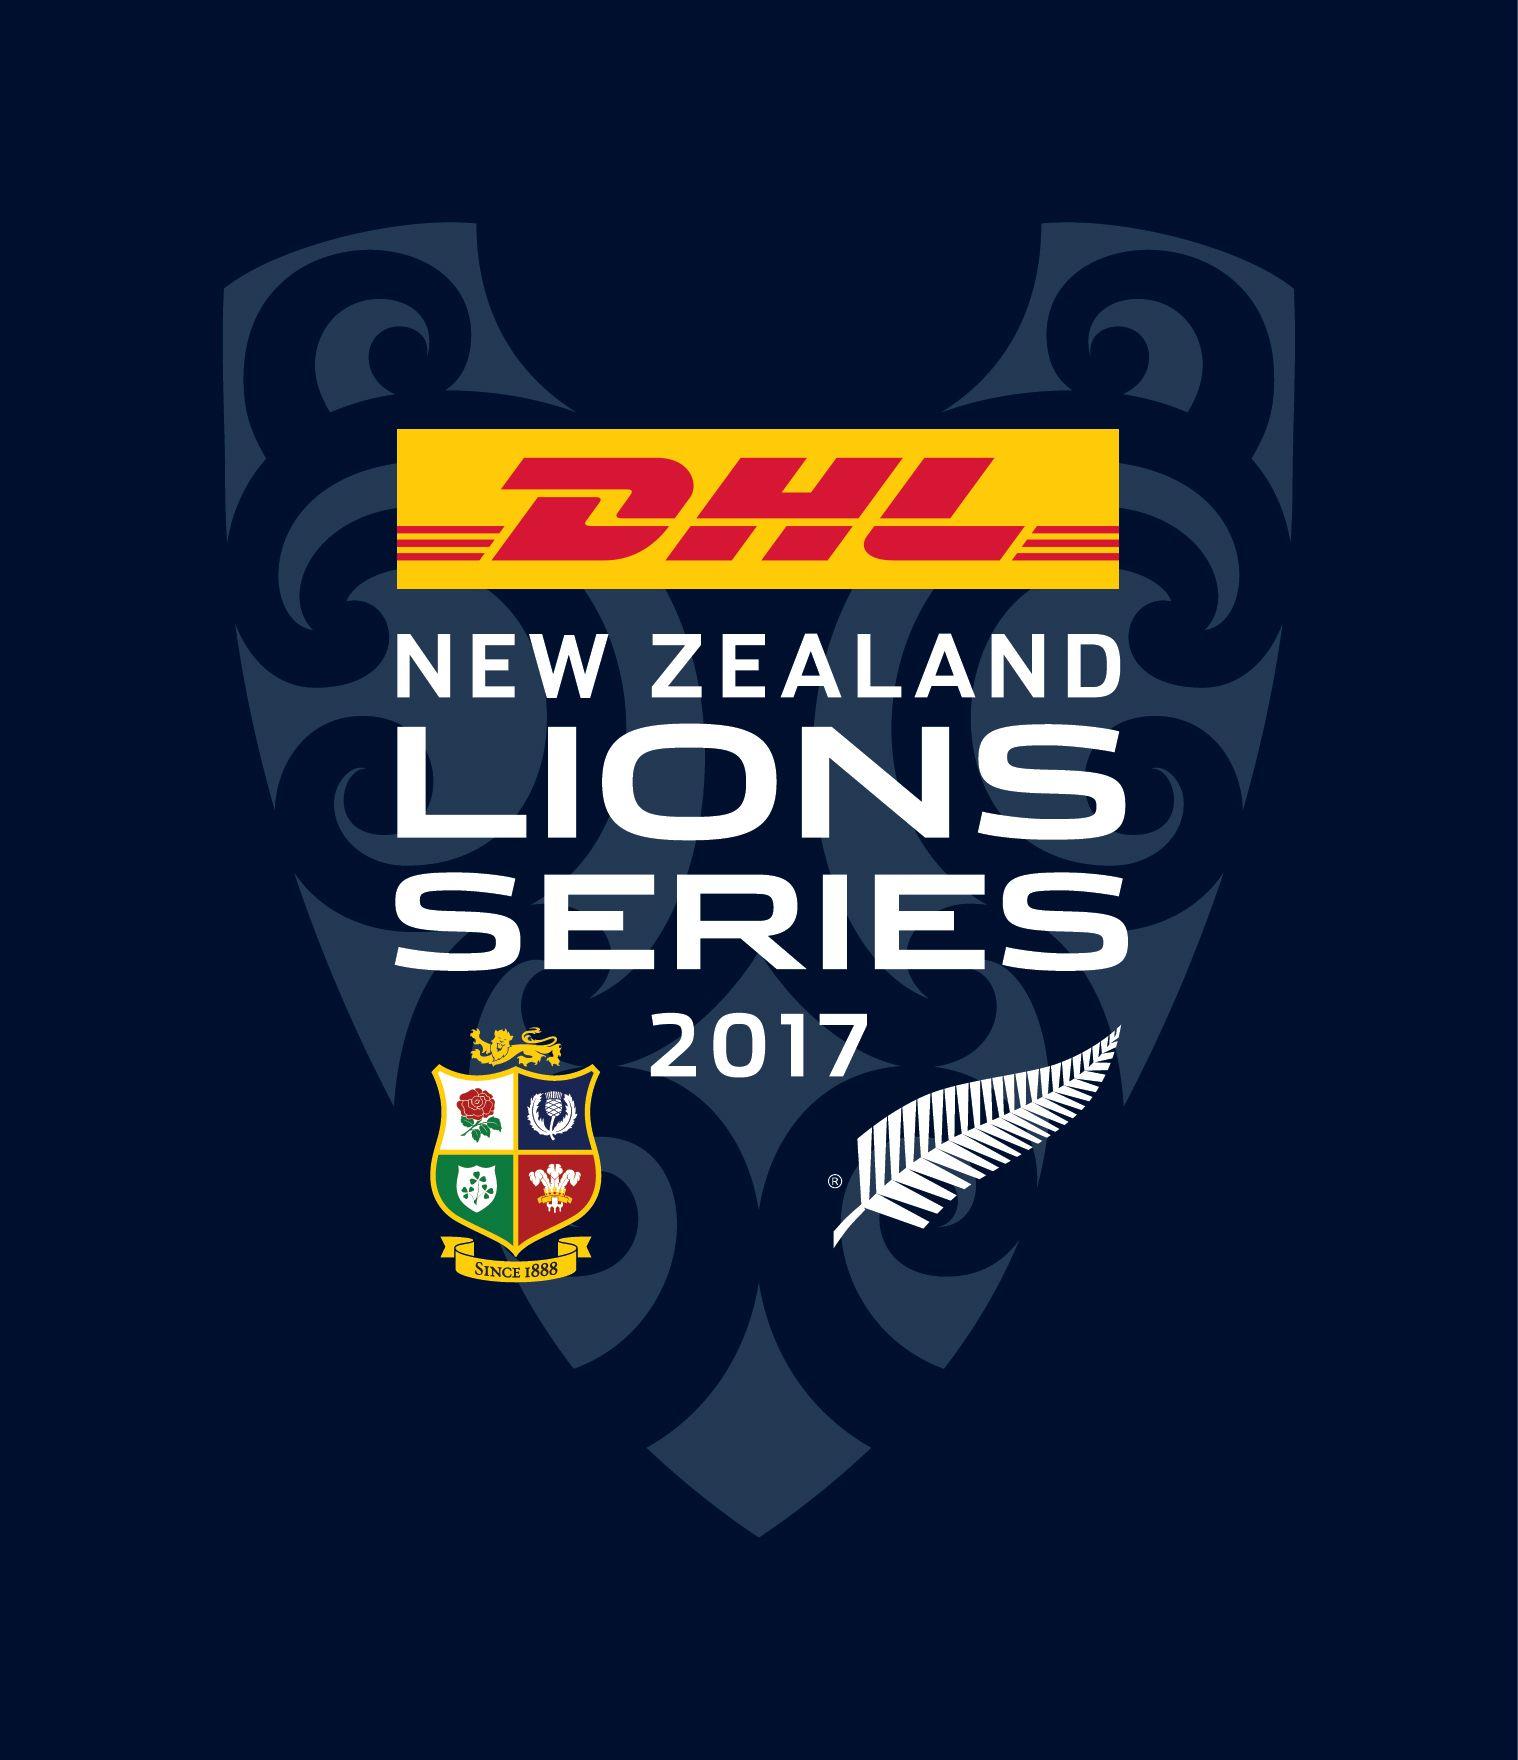 DHL New Logo - Delivering the DHL New Zealand Lions Series 2017 – DHL Trade Express